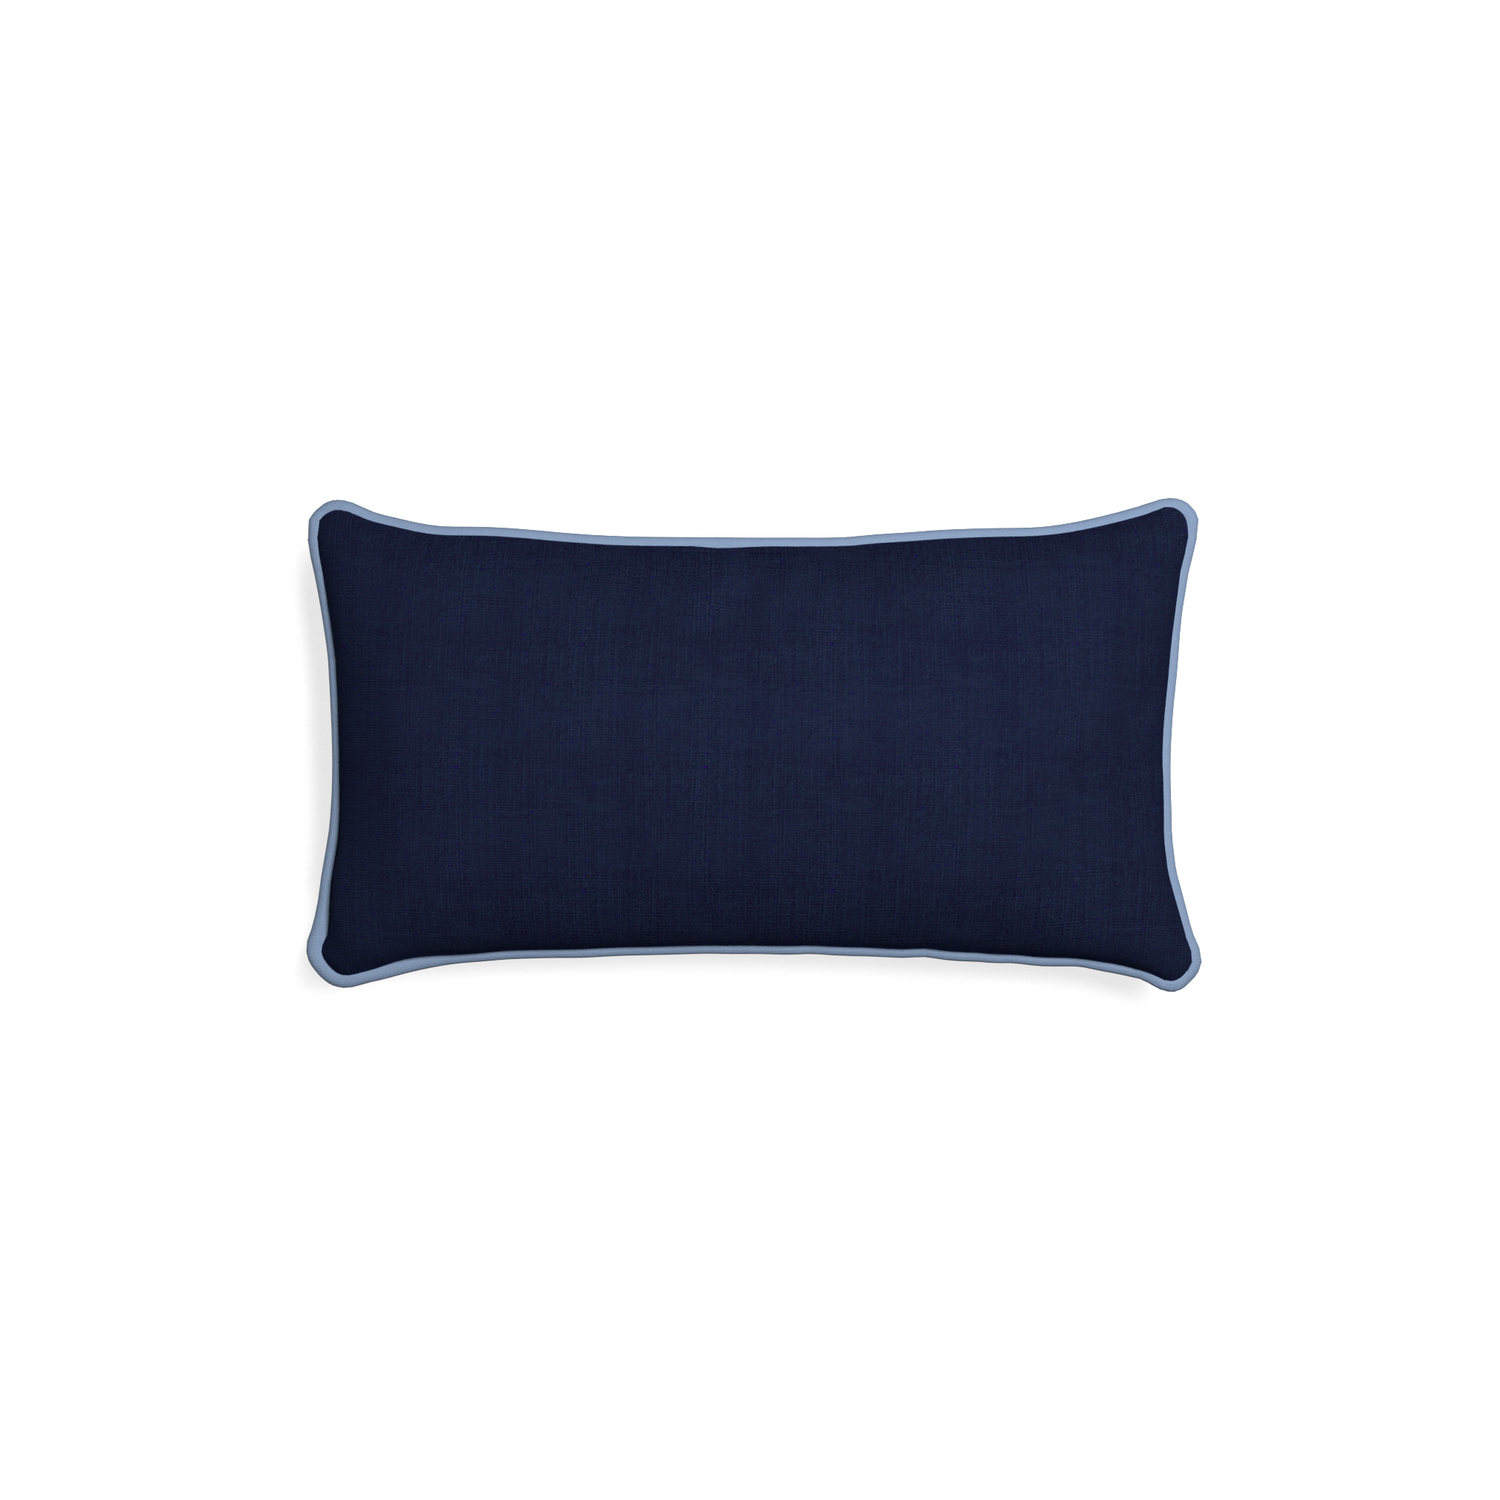 Petite-lumbar midnight custom navy bluepillow with sky piping on white background